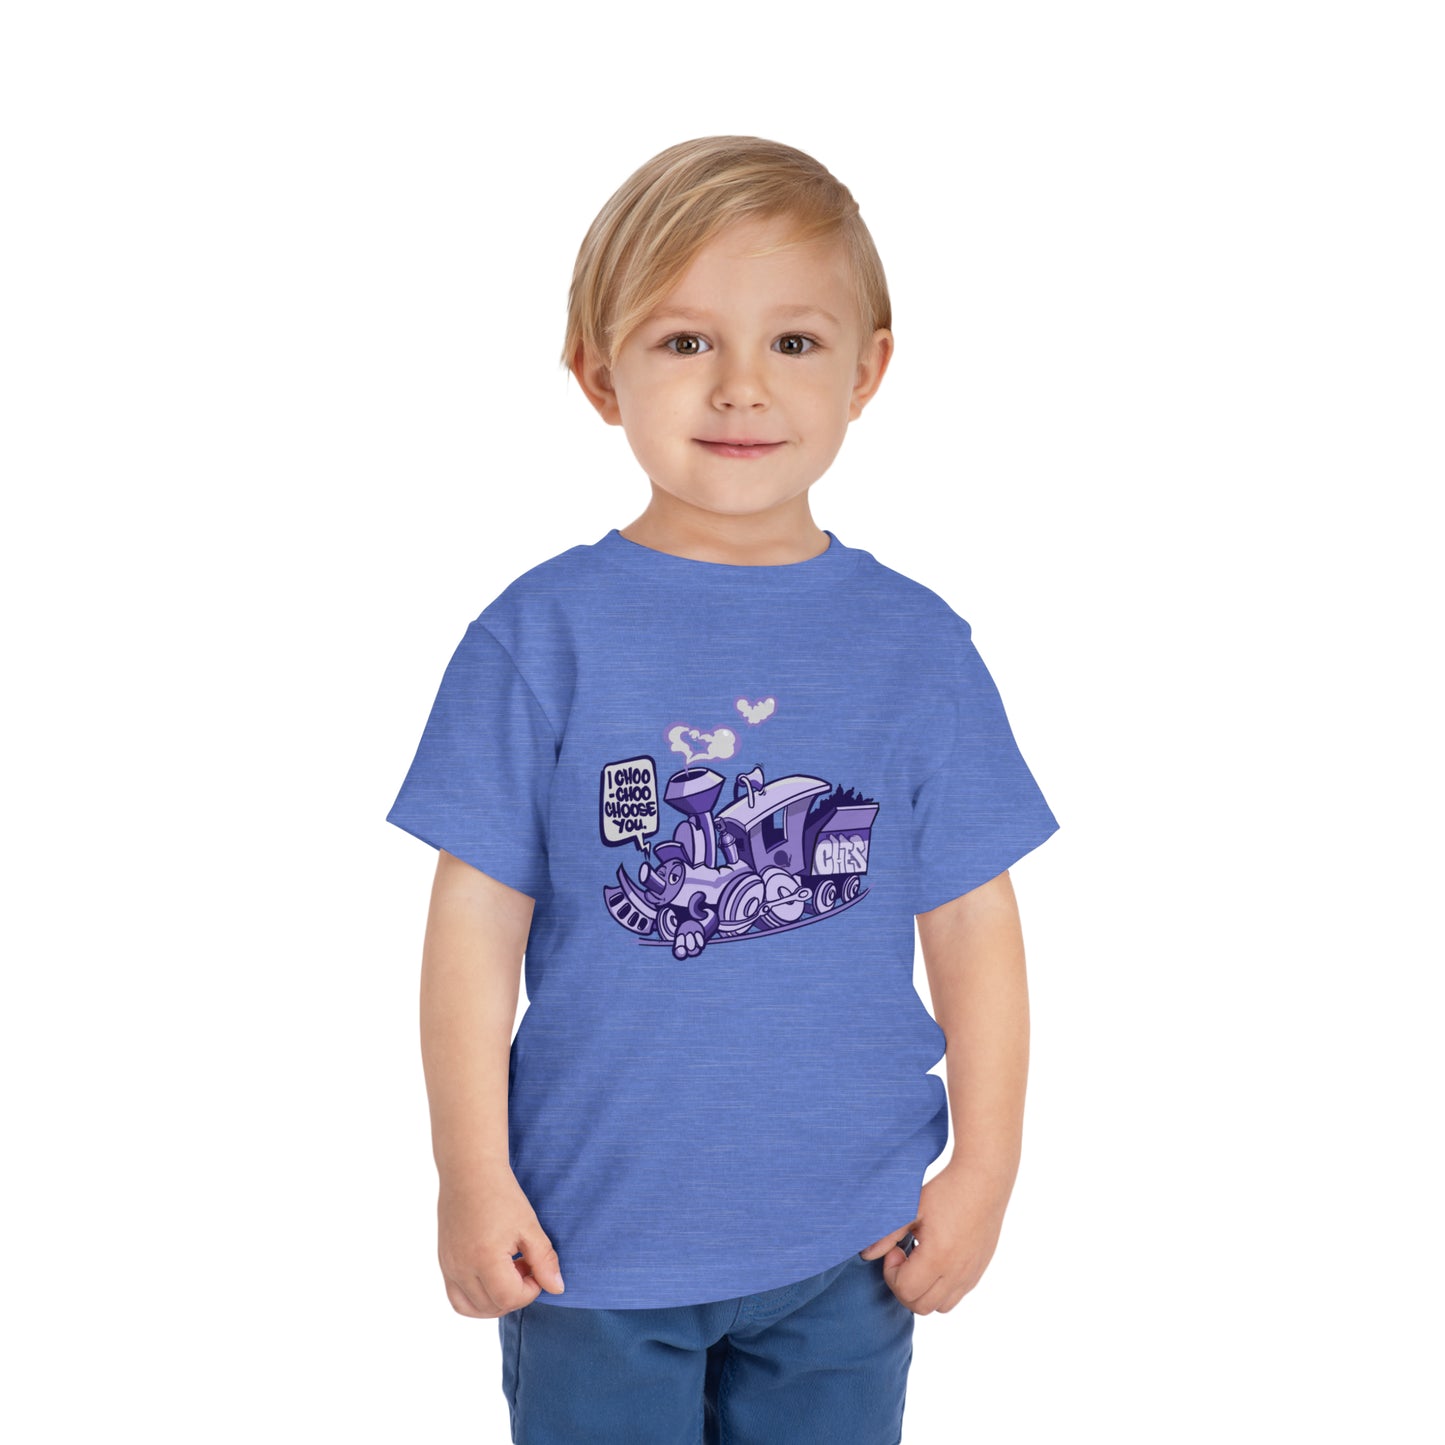 "I Choo Choose You" Toddler Tee: A Whimsical Journey in Comfort and Style!